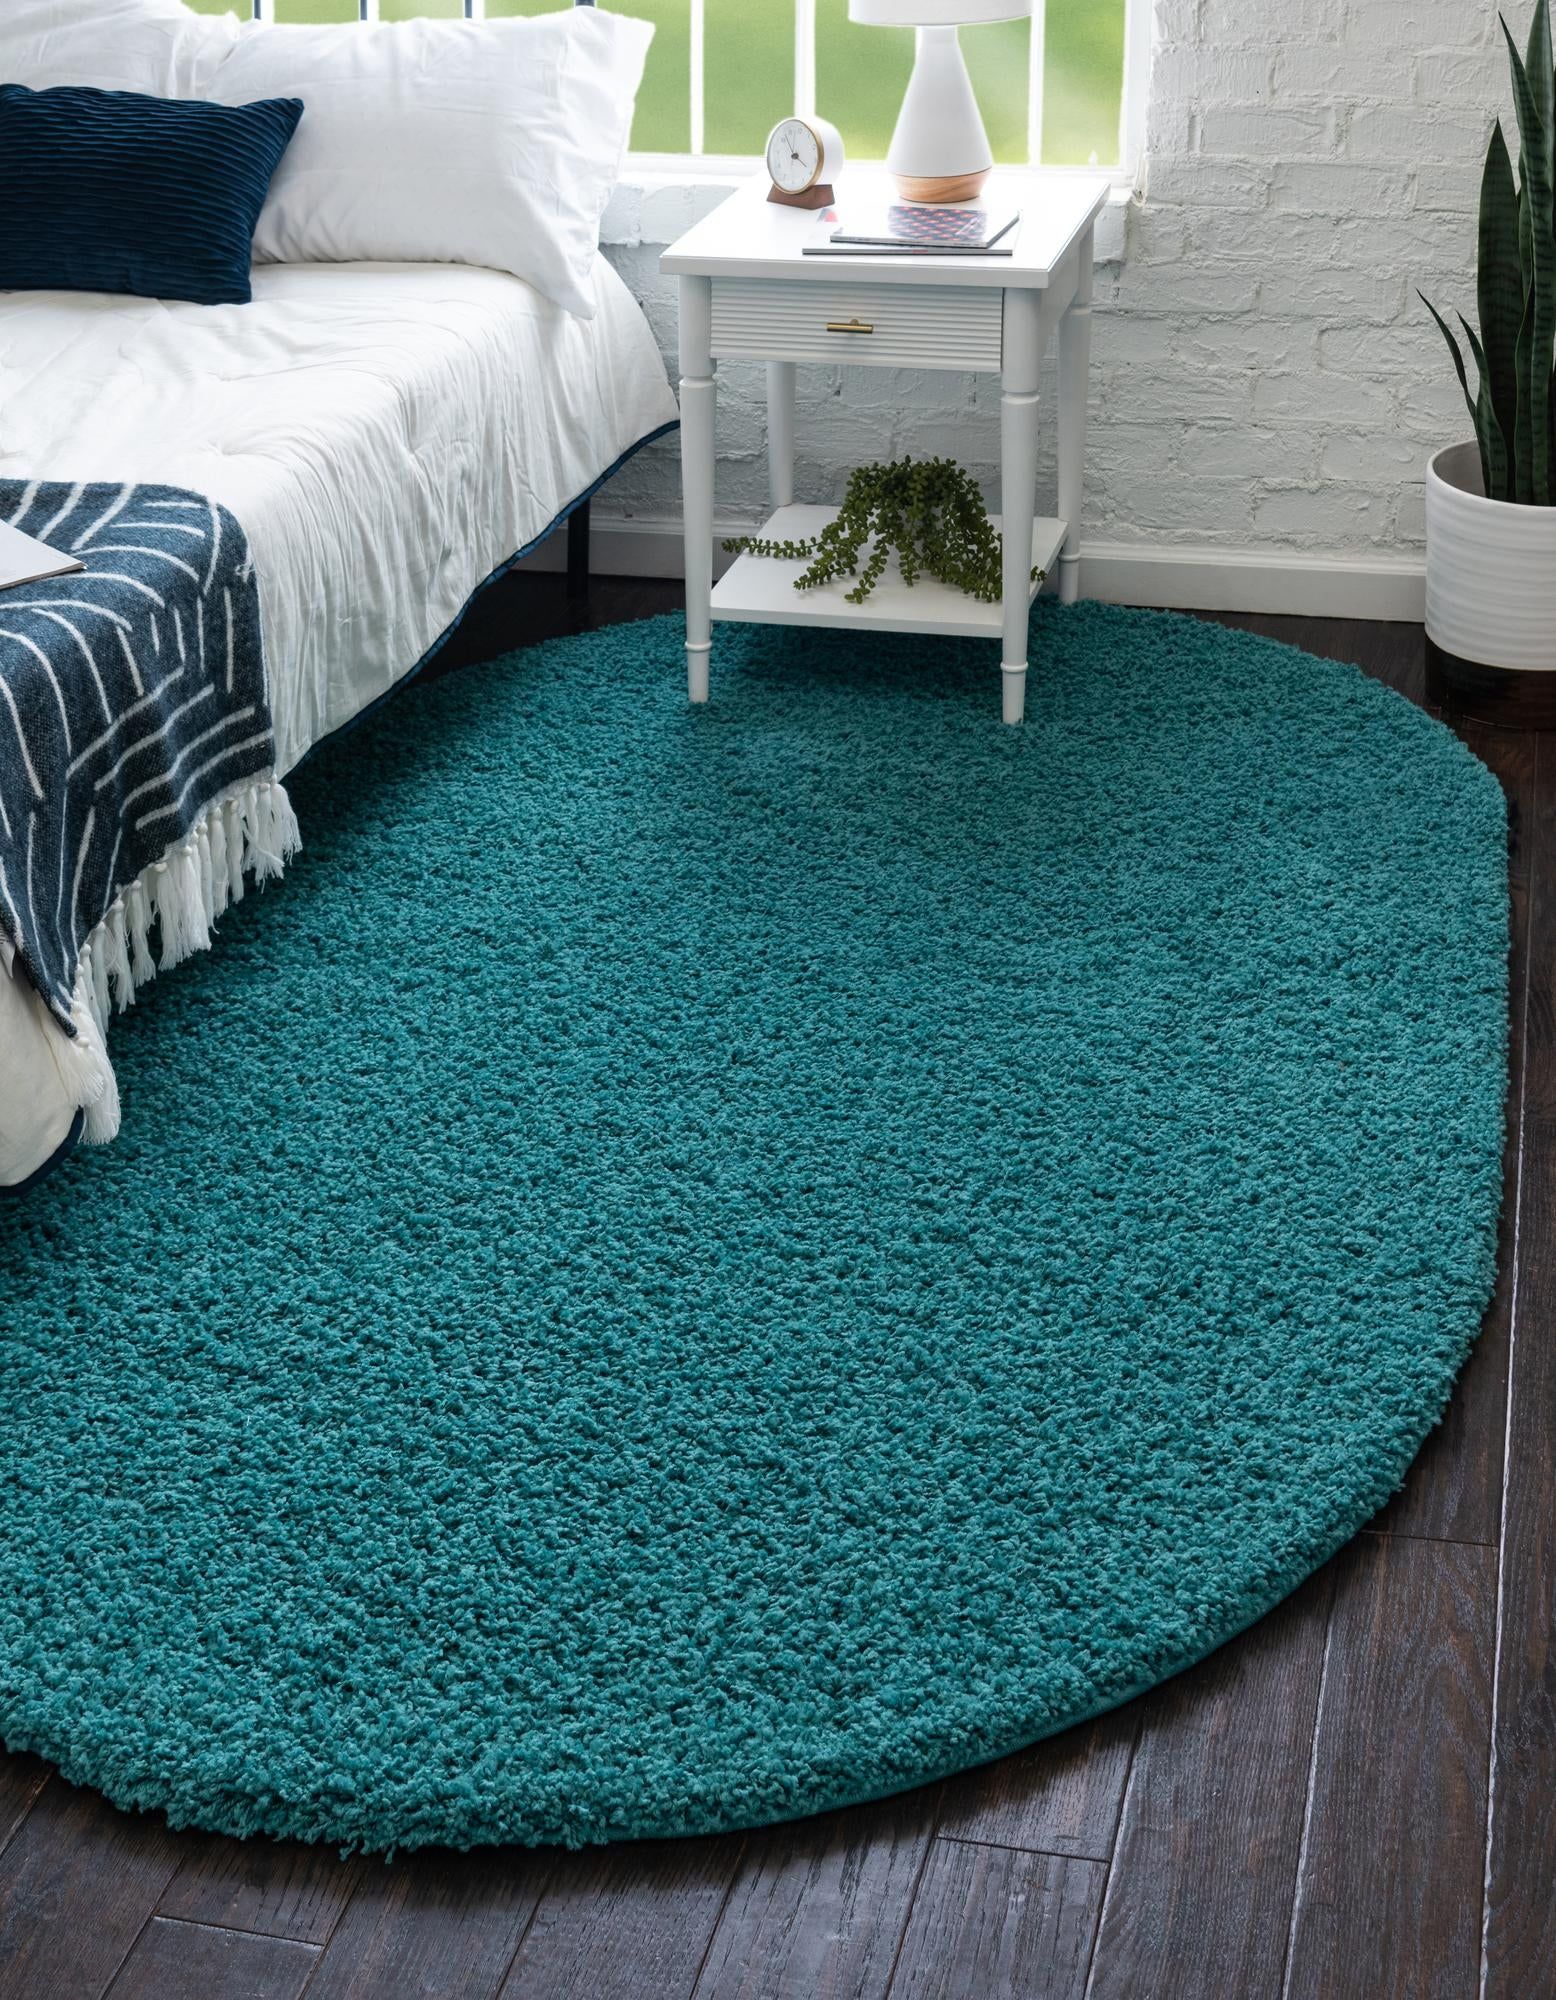 Rugs Solid Shag Collection Rug – 5' X 8' Oval Deep Aqua Blue Shag Rug  Perfect For Living Rooms, Large Dining Rooms, Open Floorplans – Walmart Throughout Shag Oval Rugs (View 9 of 15)